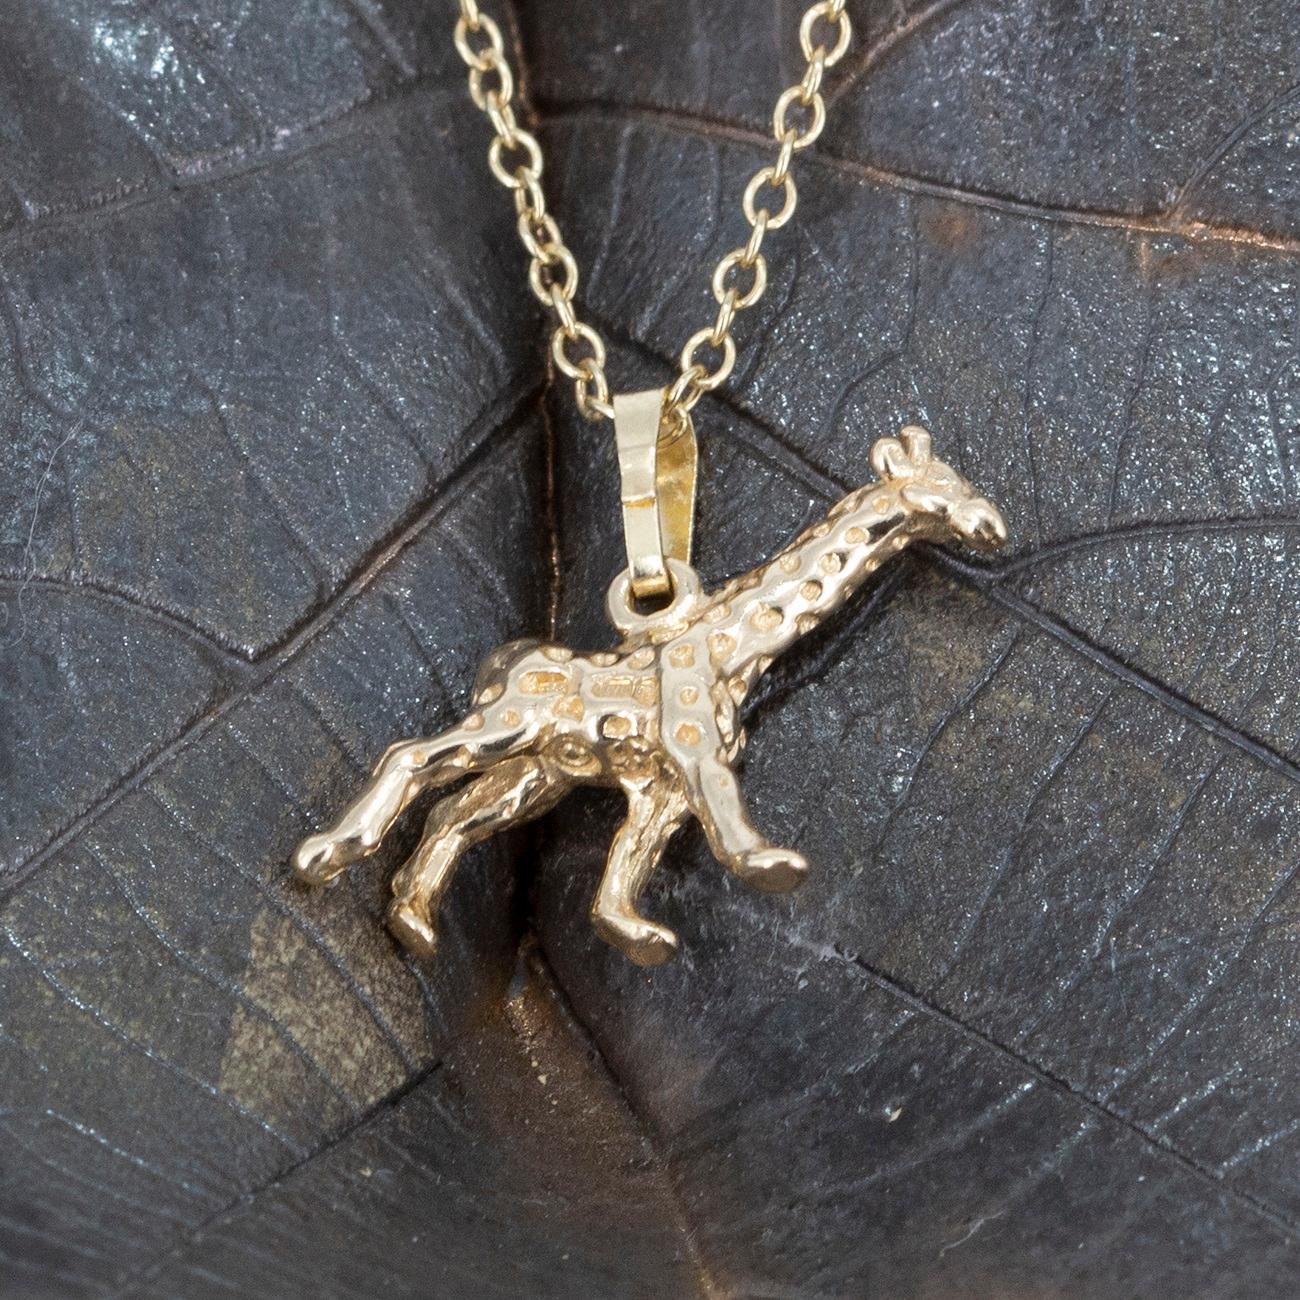 A highly detailed and realistic solid 9 carat Gold Giraffe pendant.

This stunning pendant is made by Simon Kemp Jewellers with an 18